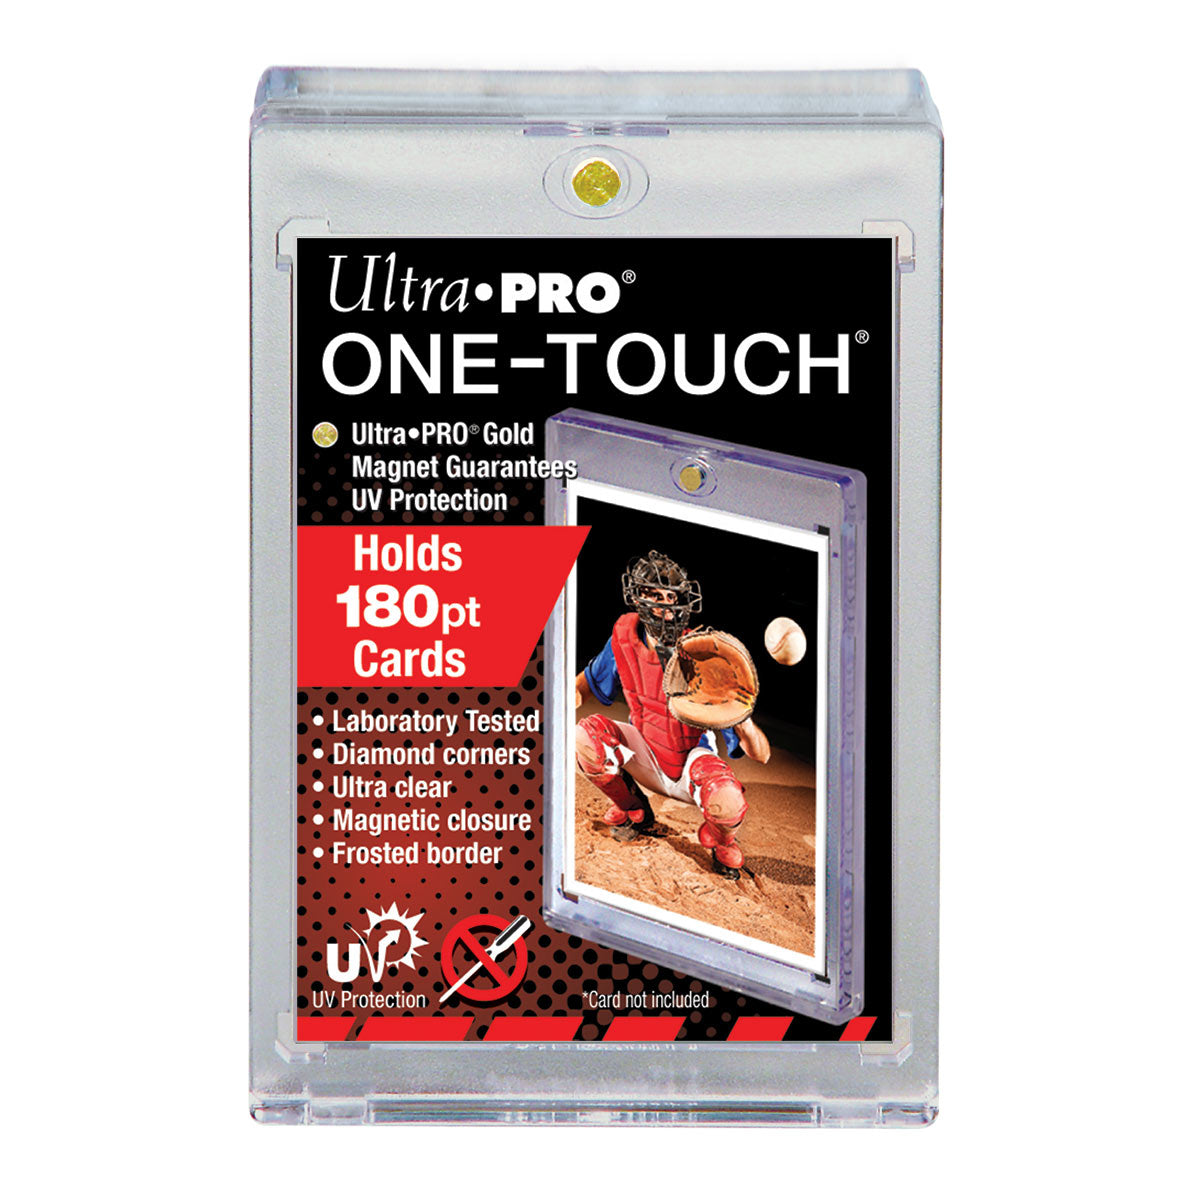 ULTRA PRO 1 TOUCH 180PT MAGNETIC HOLDER